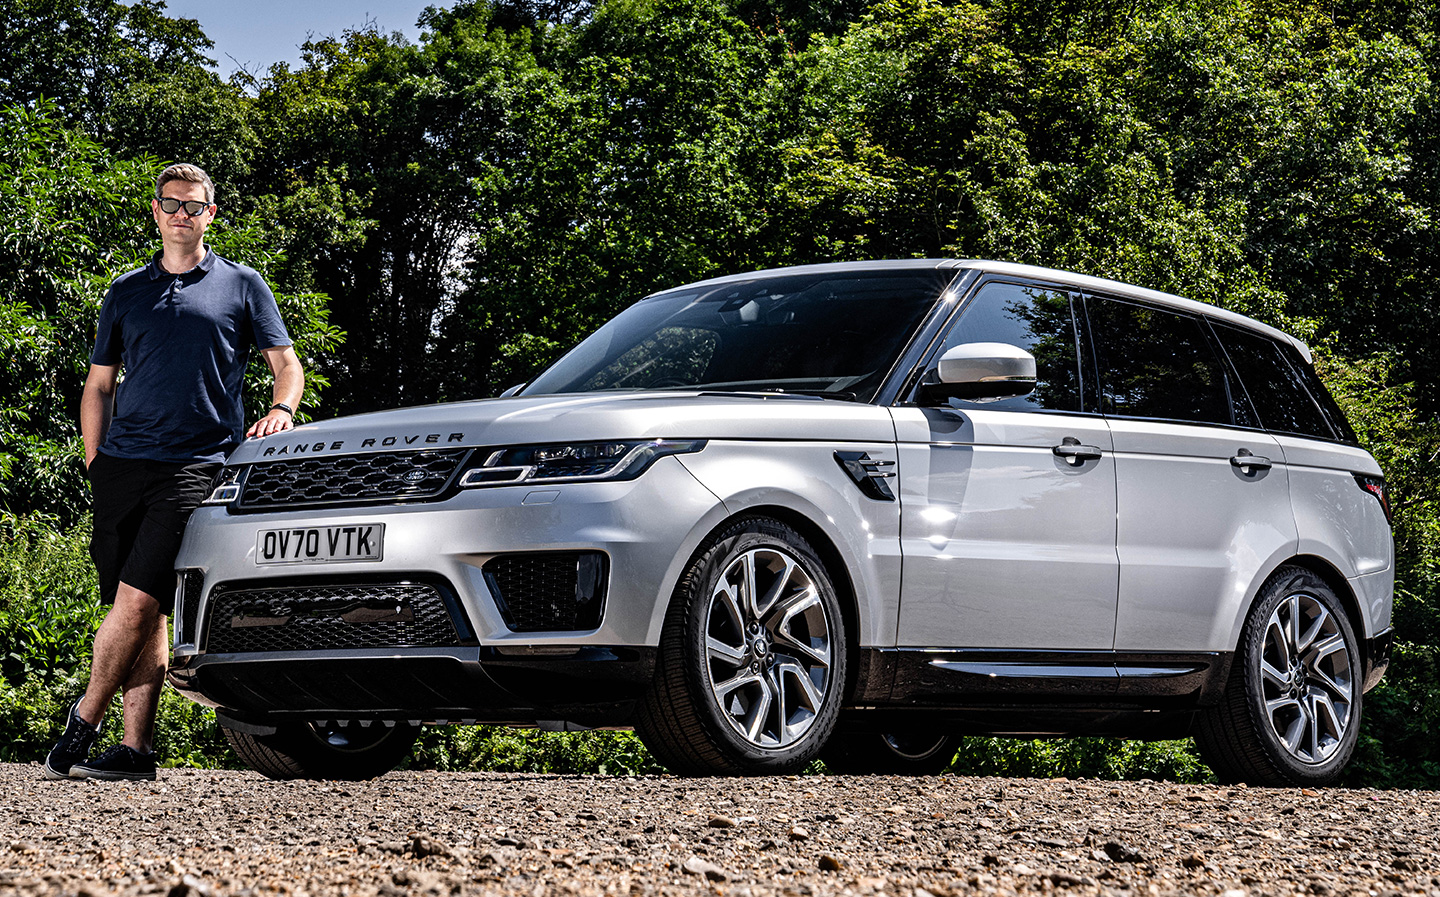 Long-term review of the 2020 Range Rover Sport P400e plug-in hybrid 4x4 by WIll Dron for Sunday Times Driving.co.uk